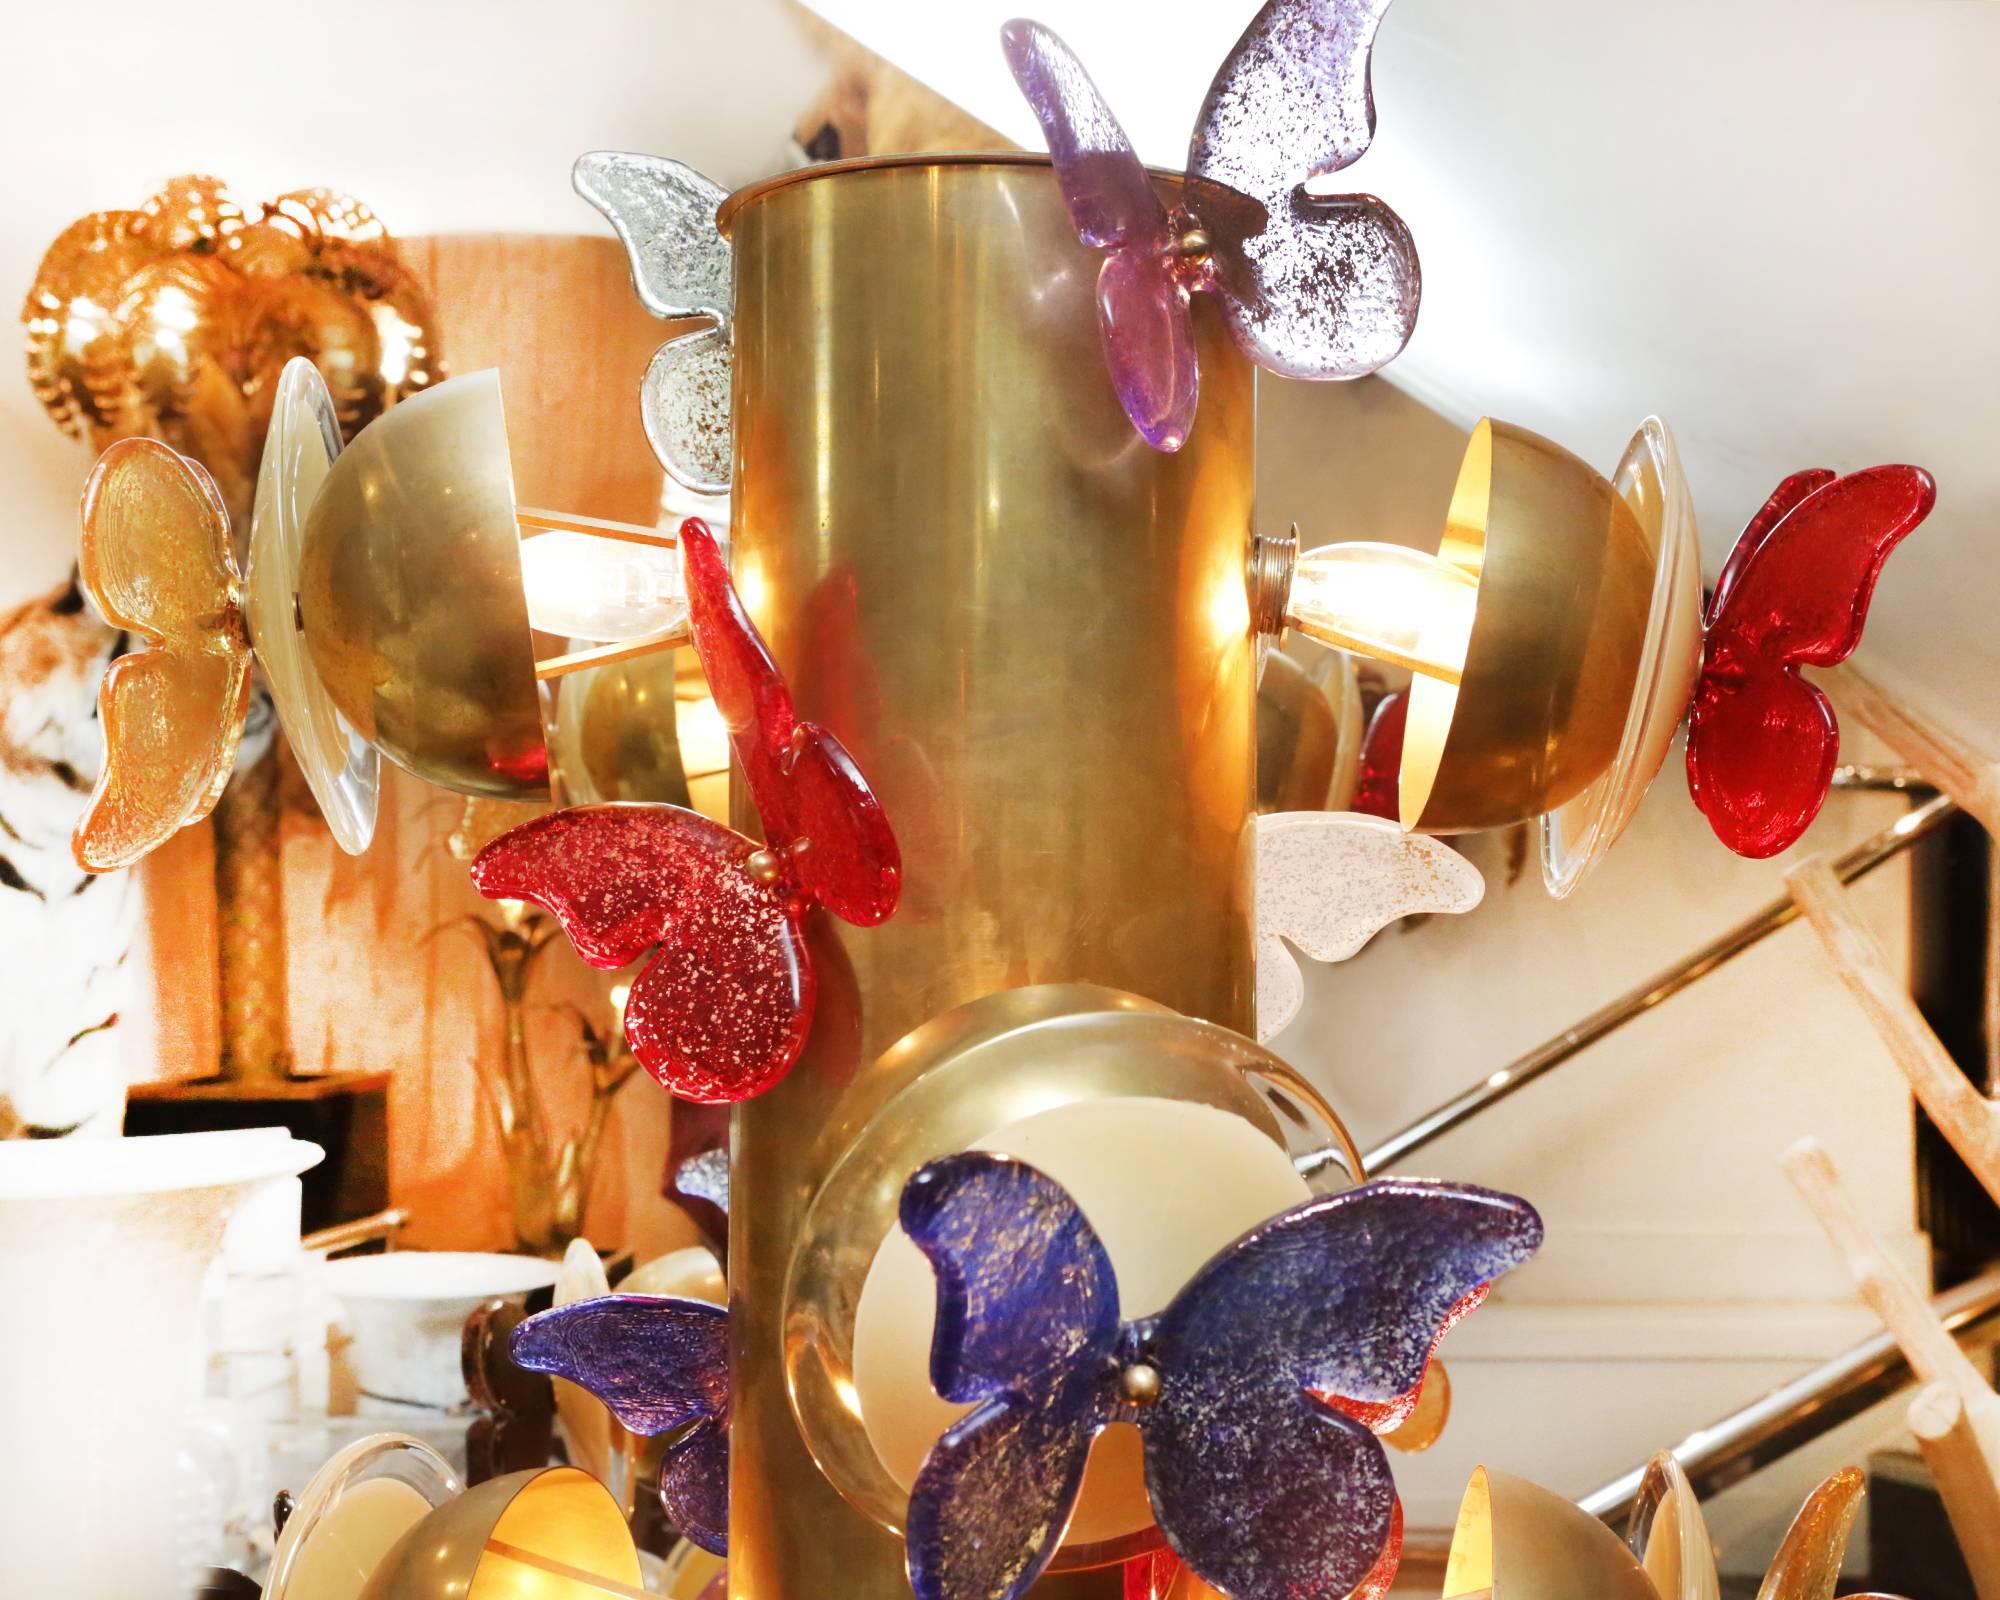 Floor lamp butterflies Murano with structure in solid
brass. Year 1980, master work with colorful butterflies
in real Murano glass. Floor lamp presented during a
Jean-Paul Gaultier's fashion show.
With eight bulbs and 20